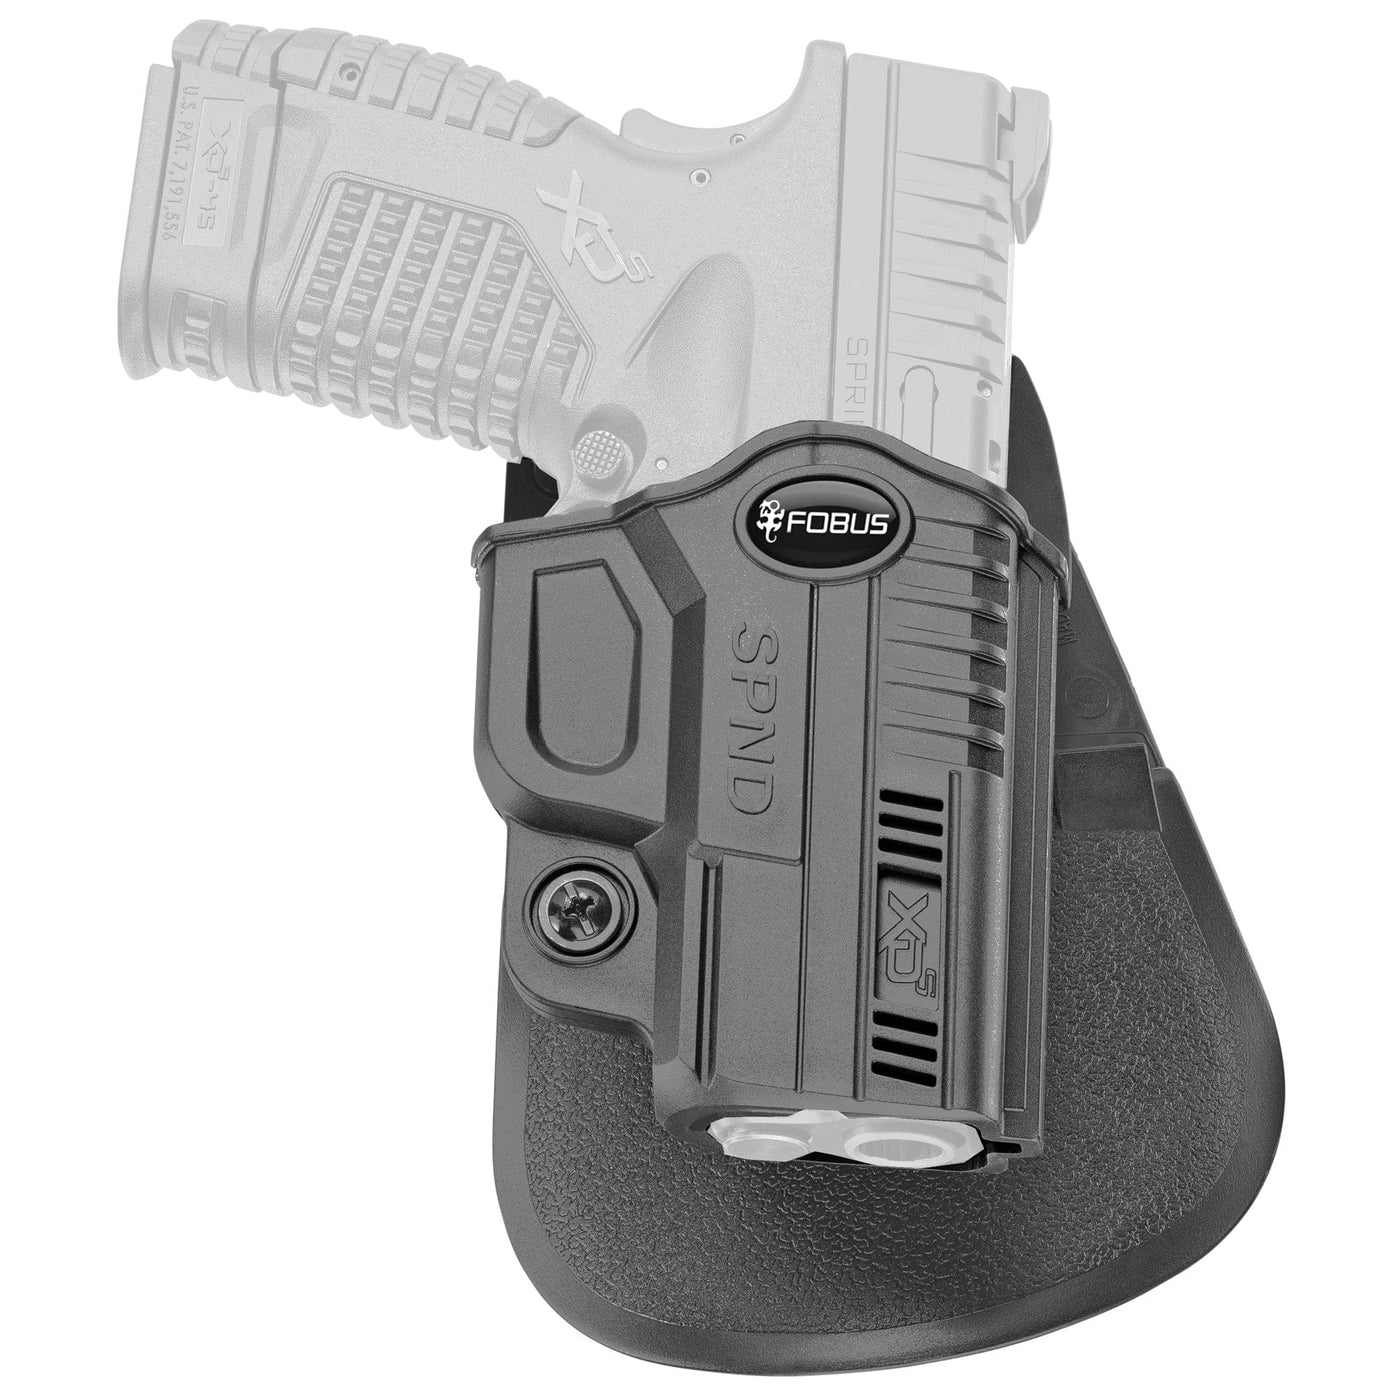 Fobus Fobus Holster E2 Paddle For - Springfield Xd-s 3.3" & 4" Firearm Accessories